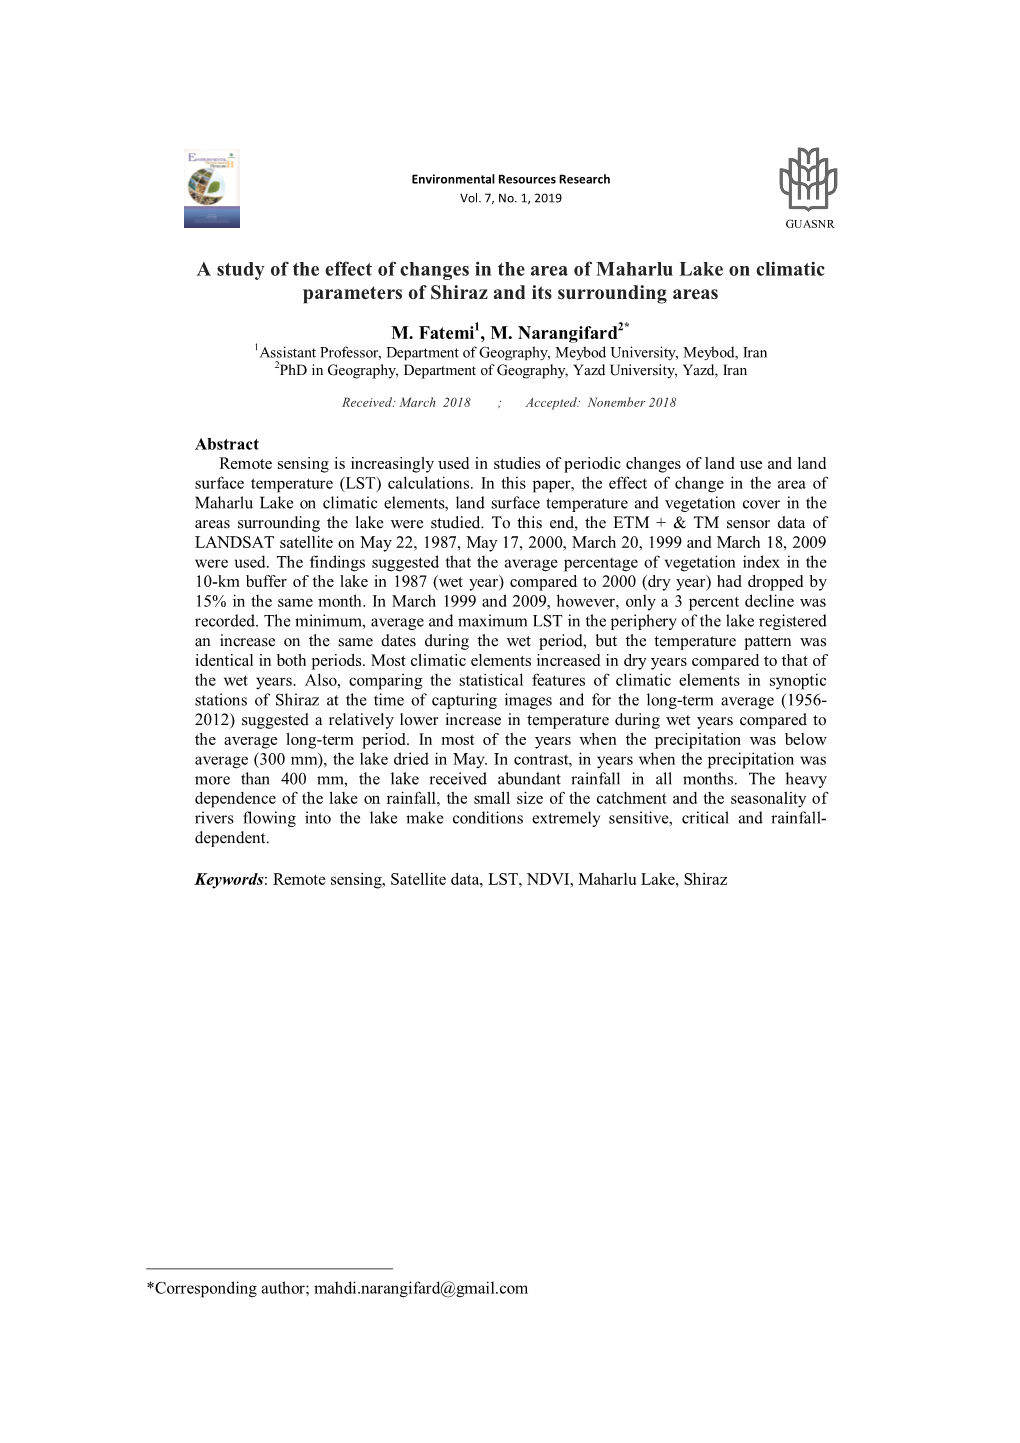 A Study of the Effect of Changes in the Area of Maharlu Lake on Climatic Parameters of Shiraz and Its Surrounding Areas